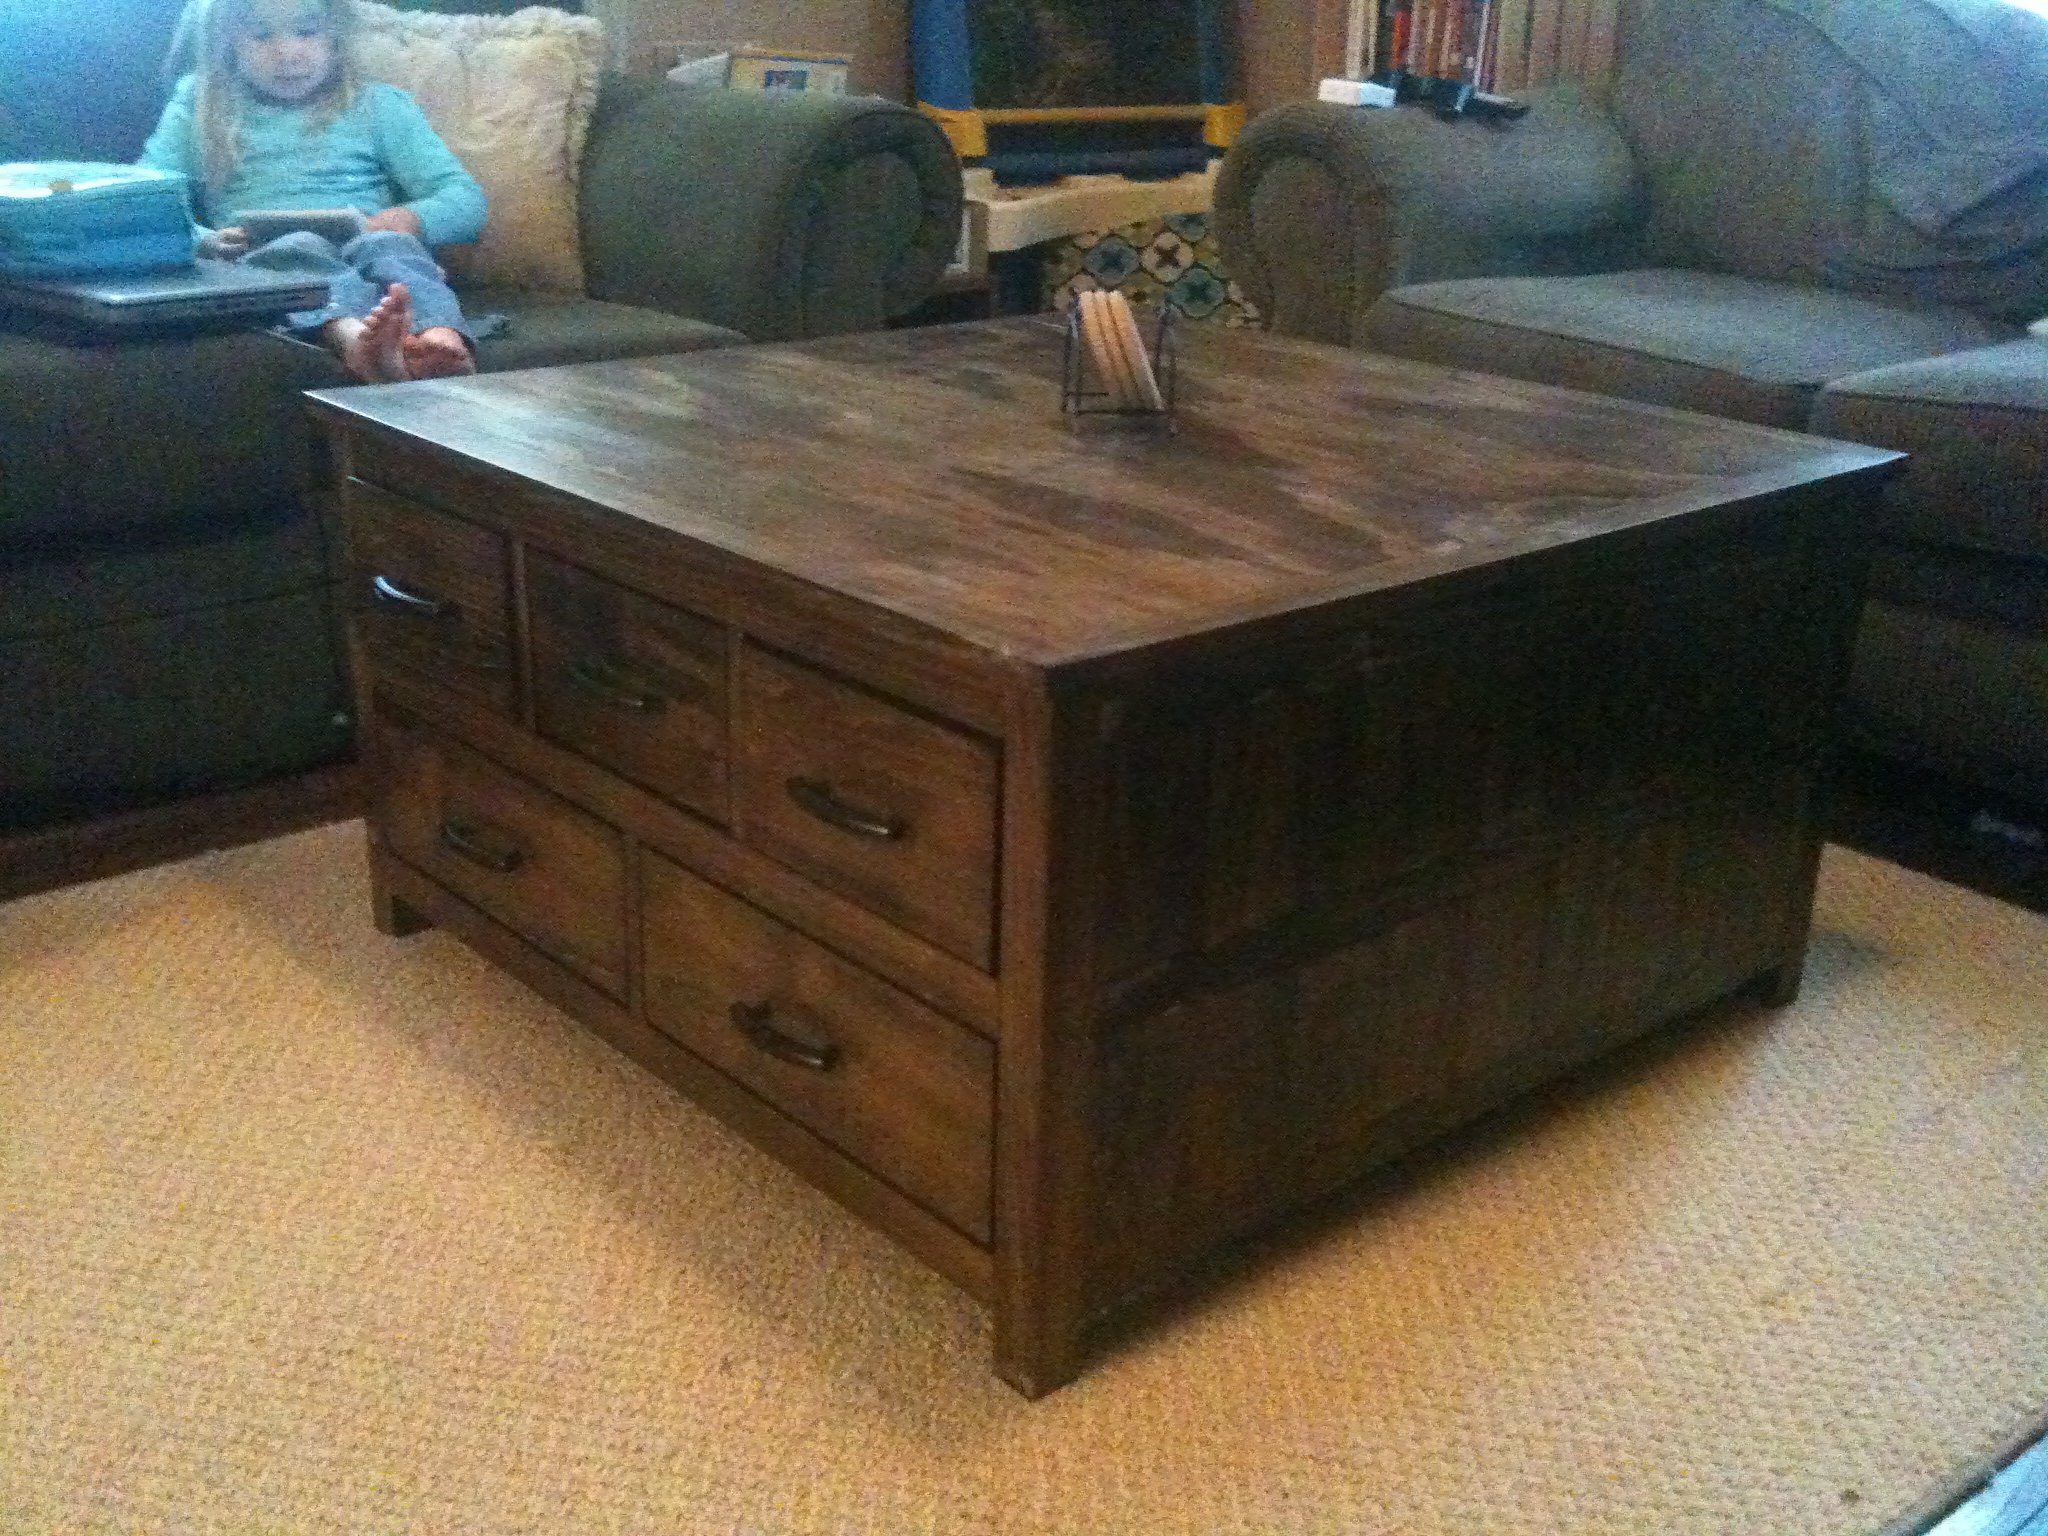 40+ square shadow box coffee table with drawers Ikea ribba picture